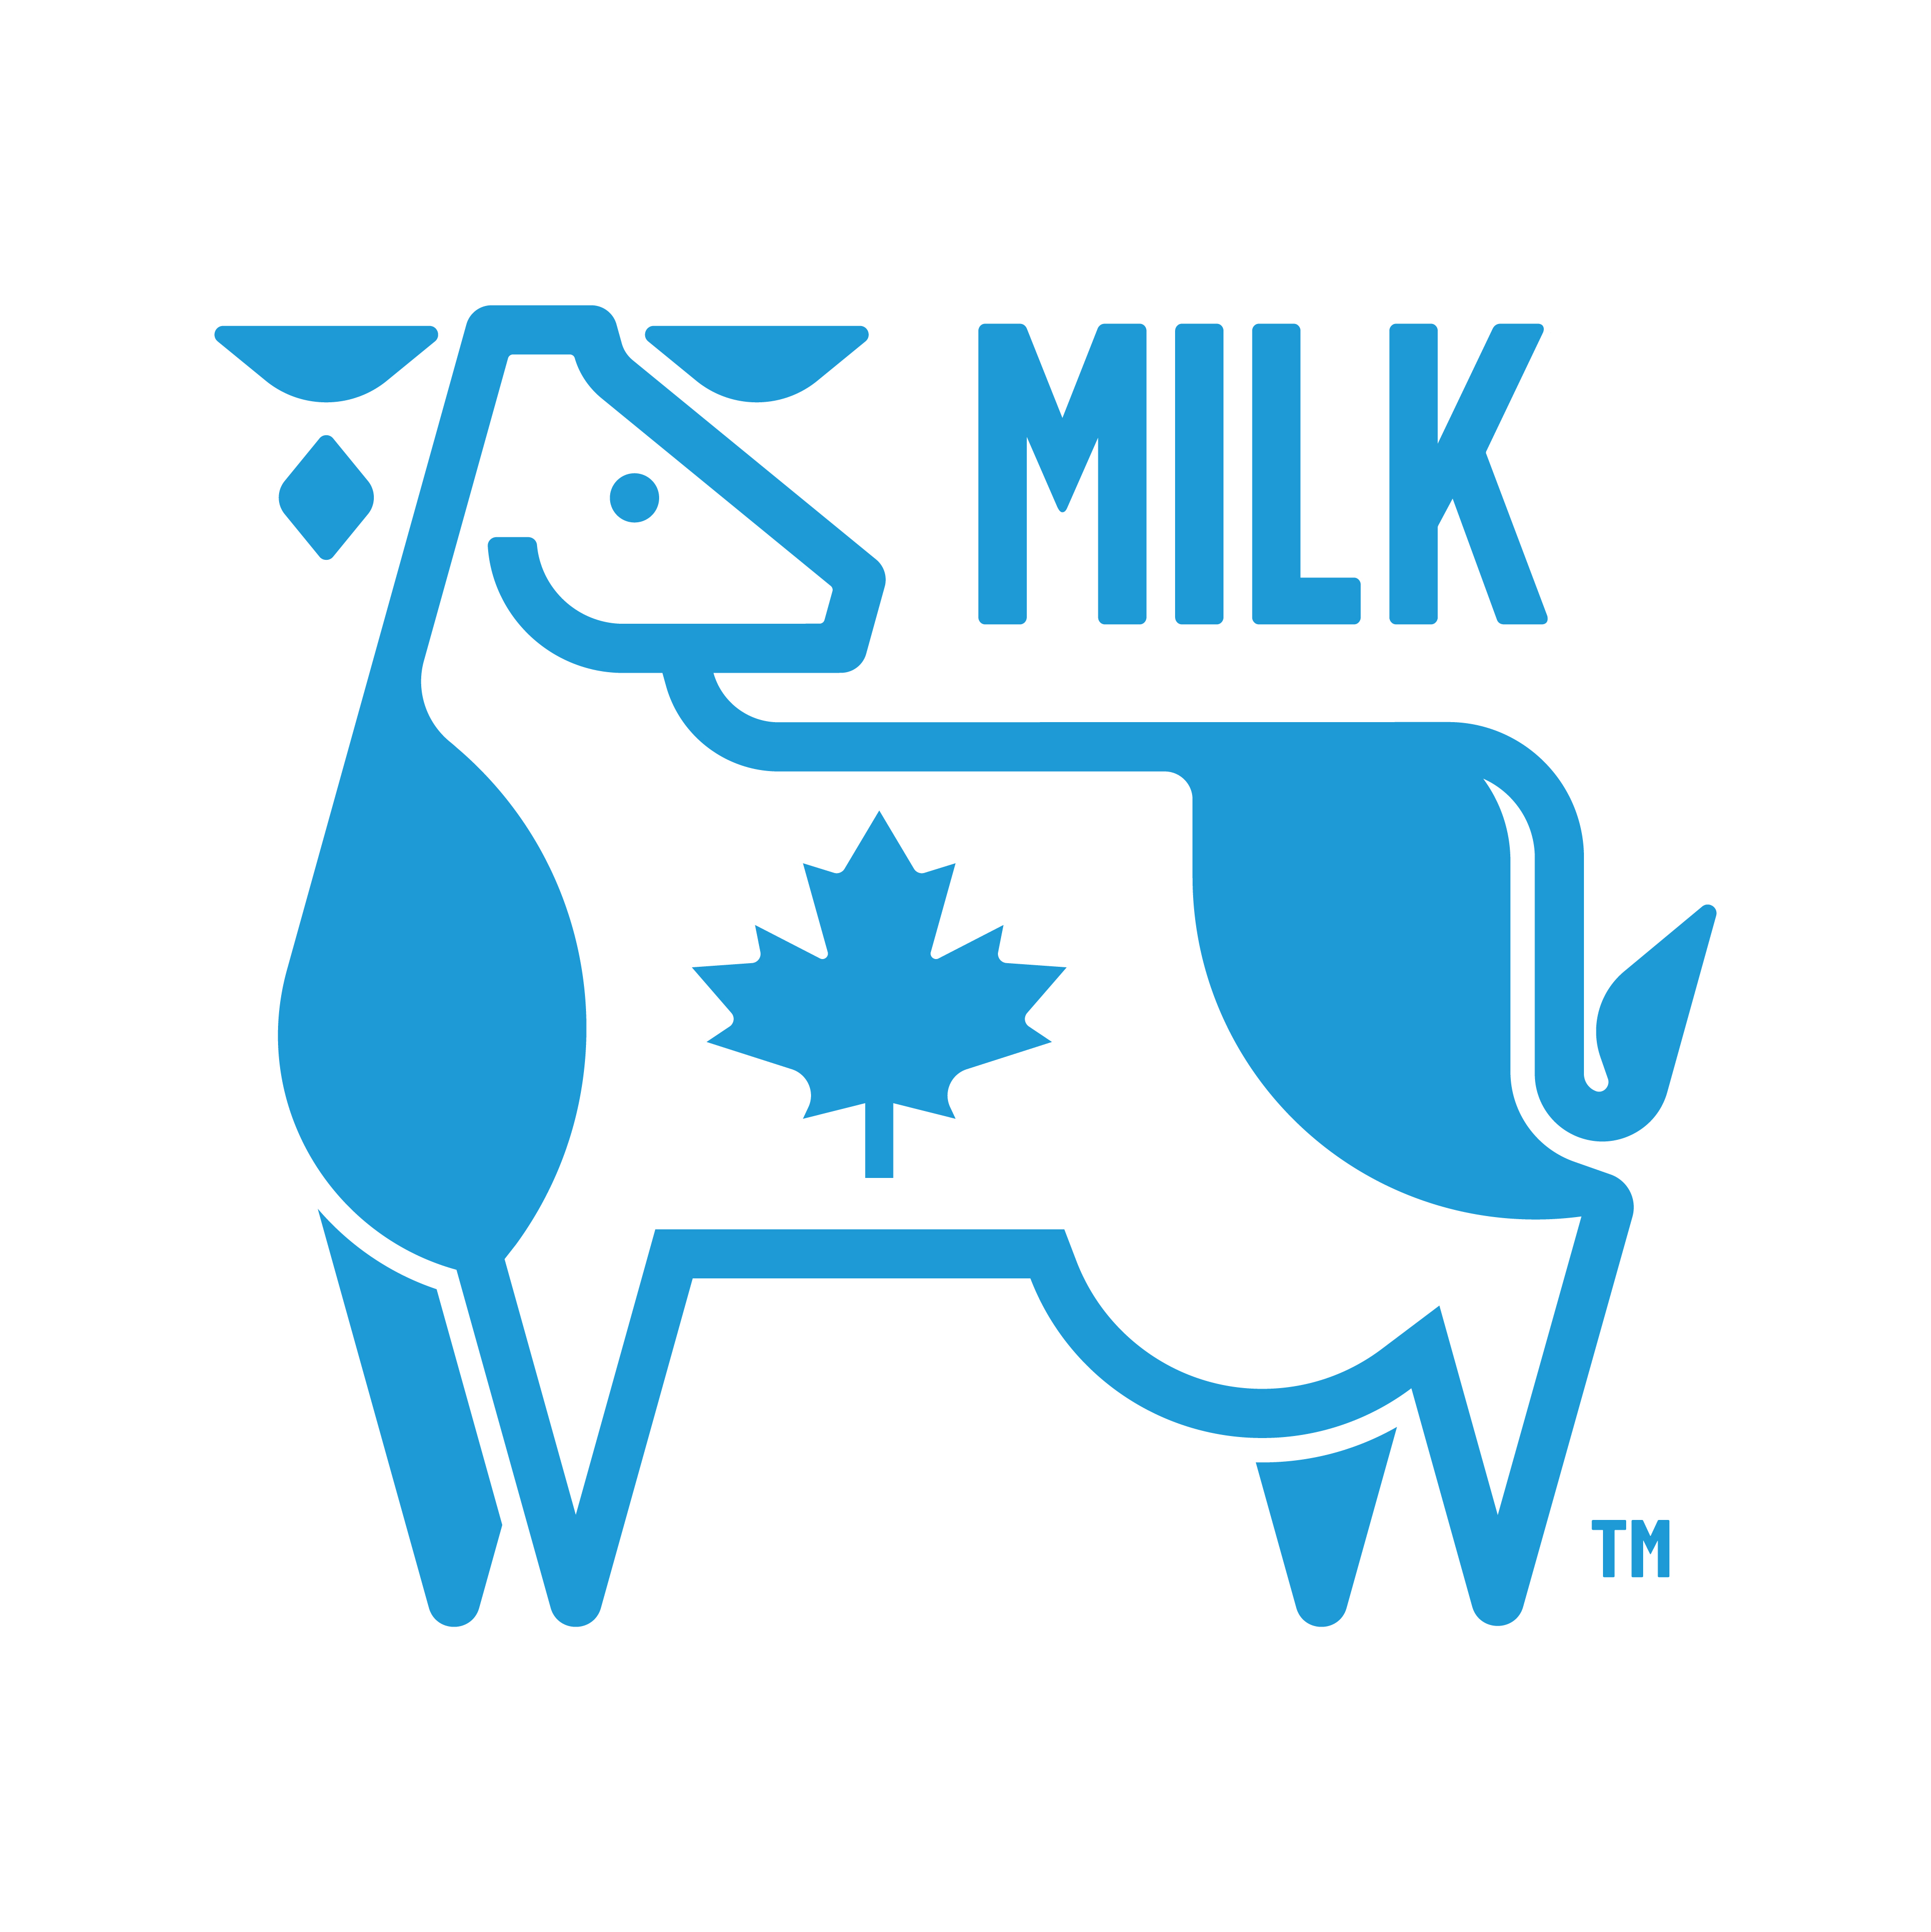 Canadian Milk logo design by logo designer Hatch Creative for your inspiration and for the worlds largest logo competition